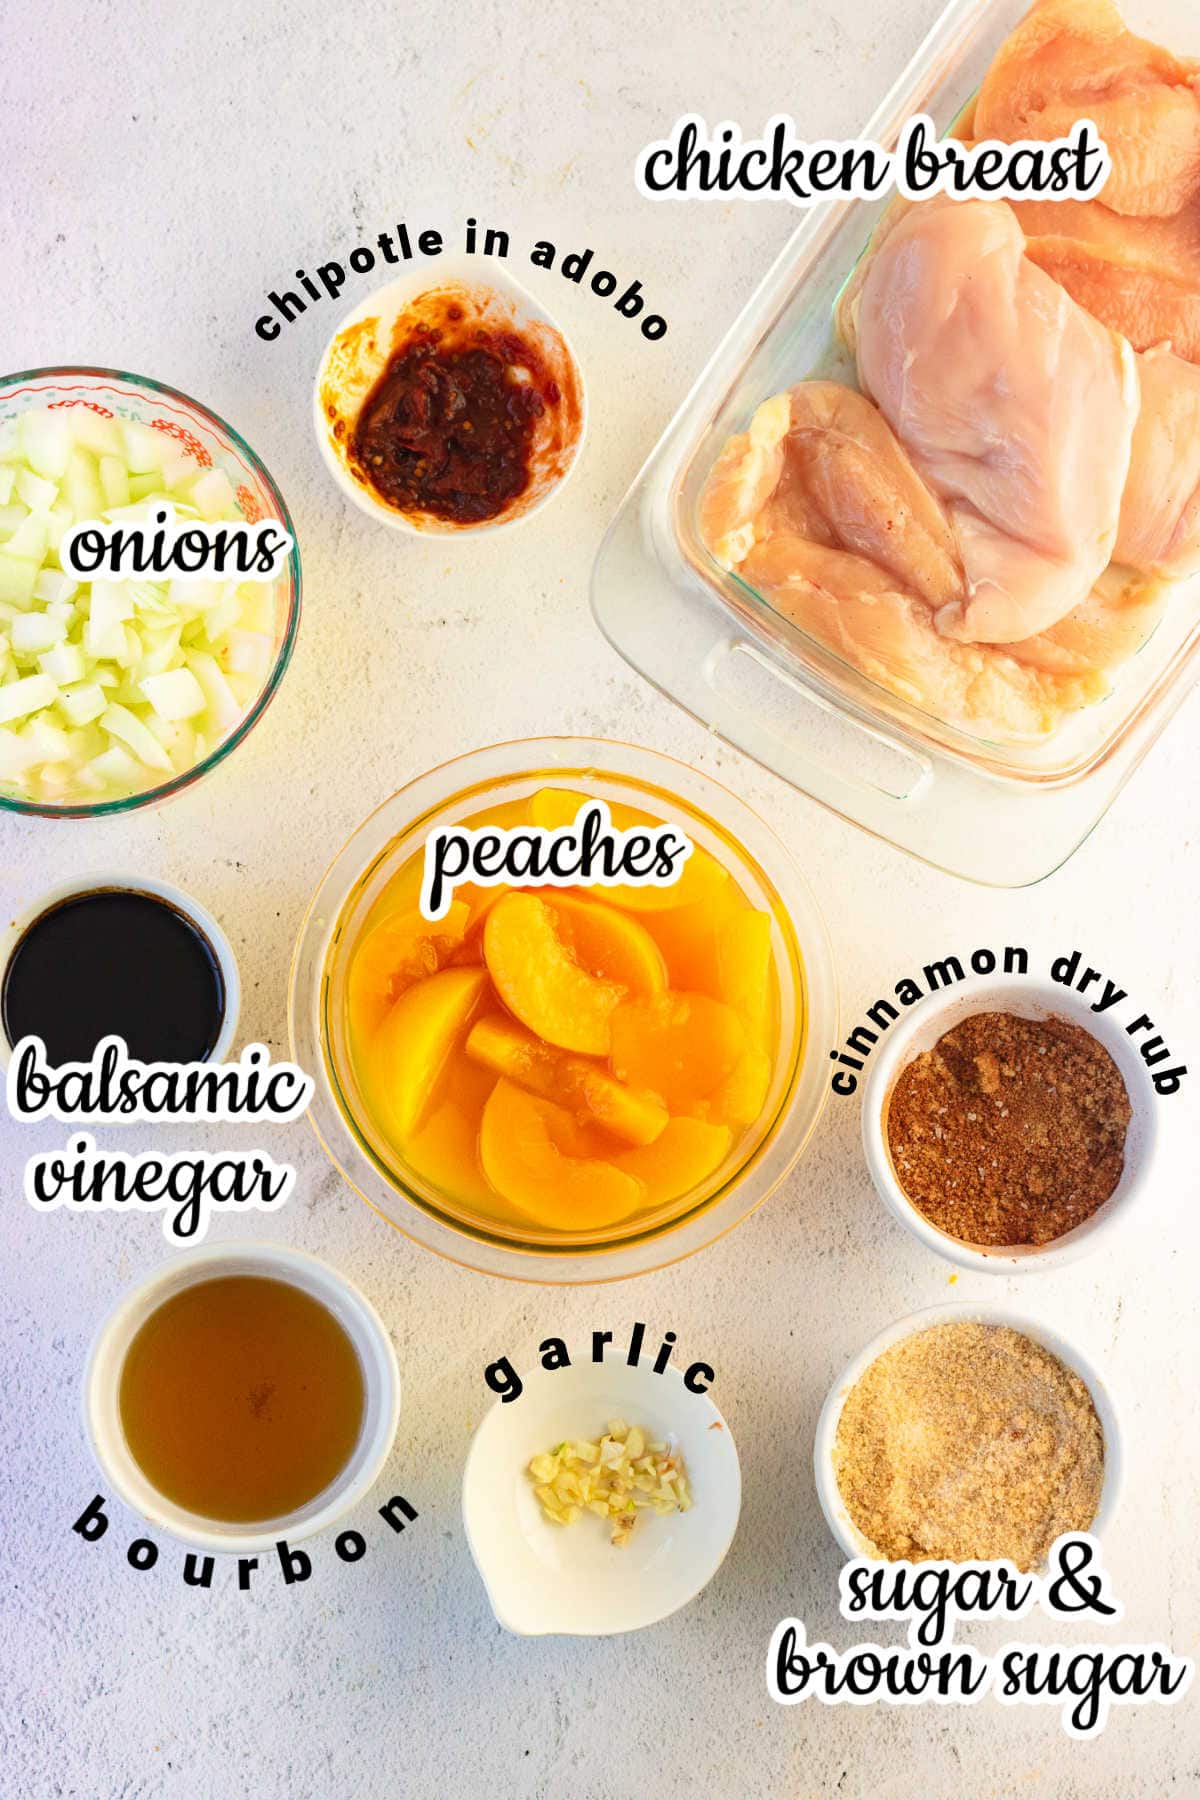 Labeled ingredients for the grilled chicken with bourbon peach sauce.